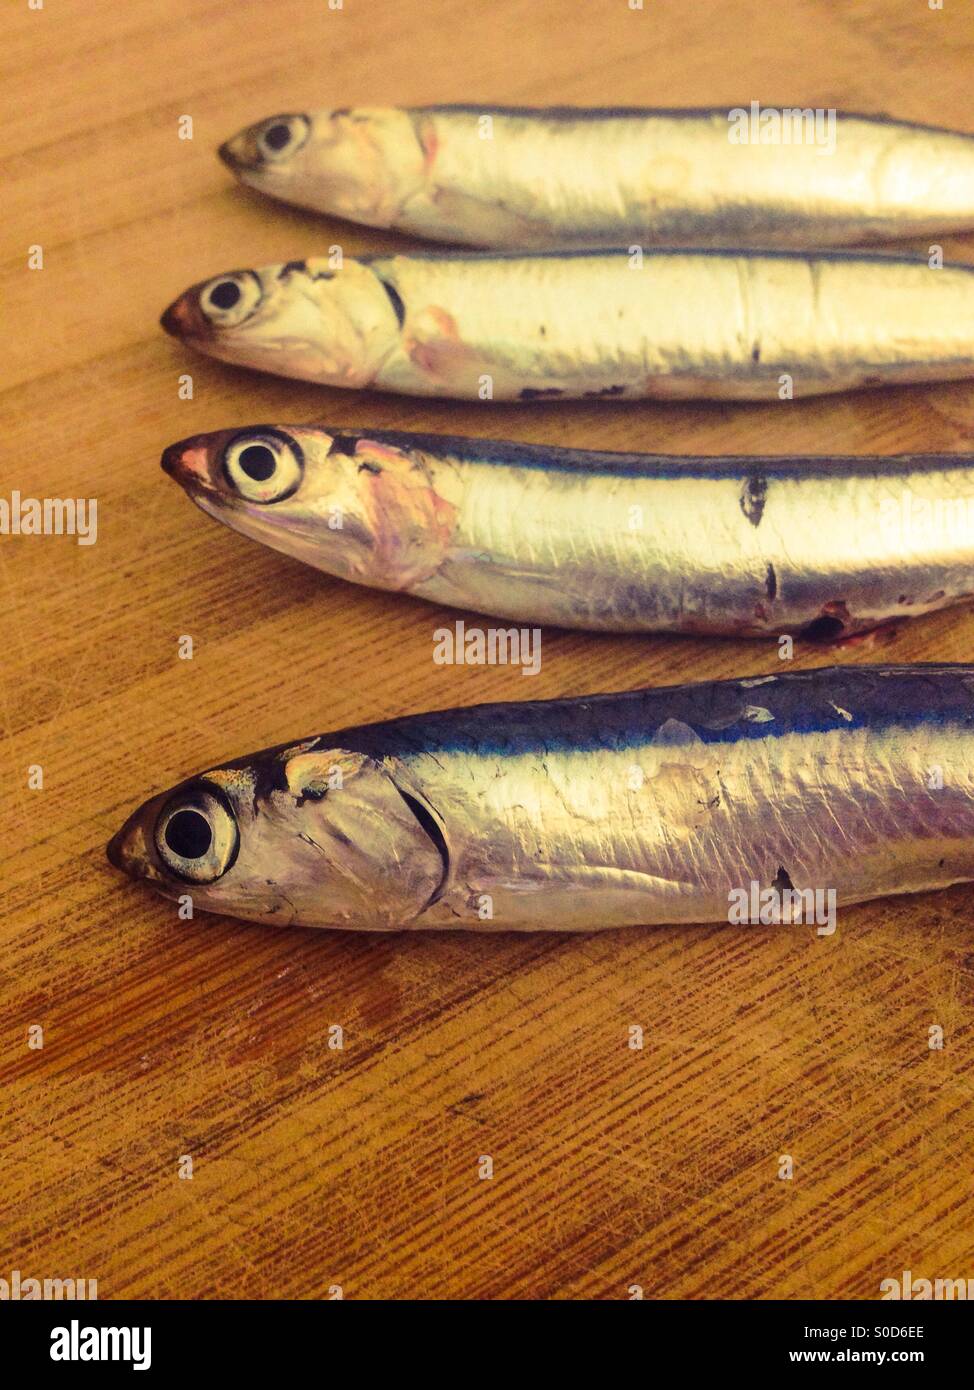 Anchovies fish on wooden board Stock Photo